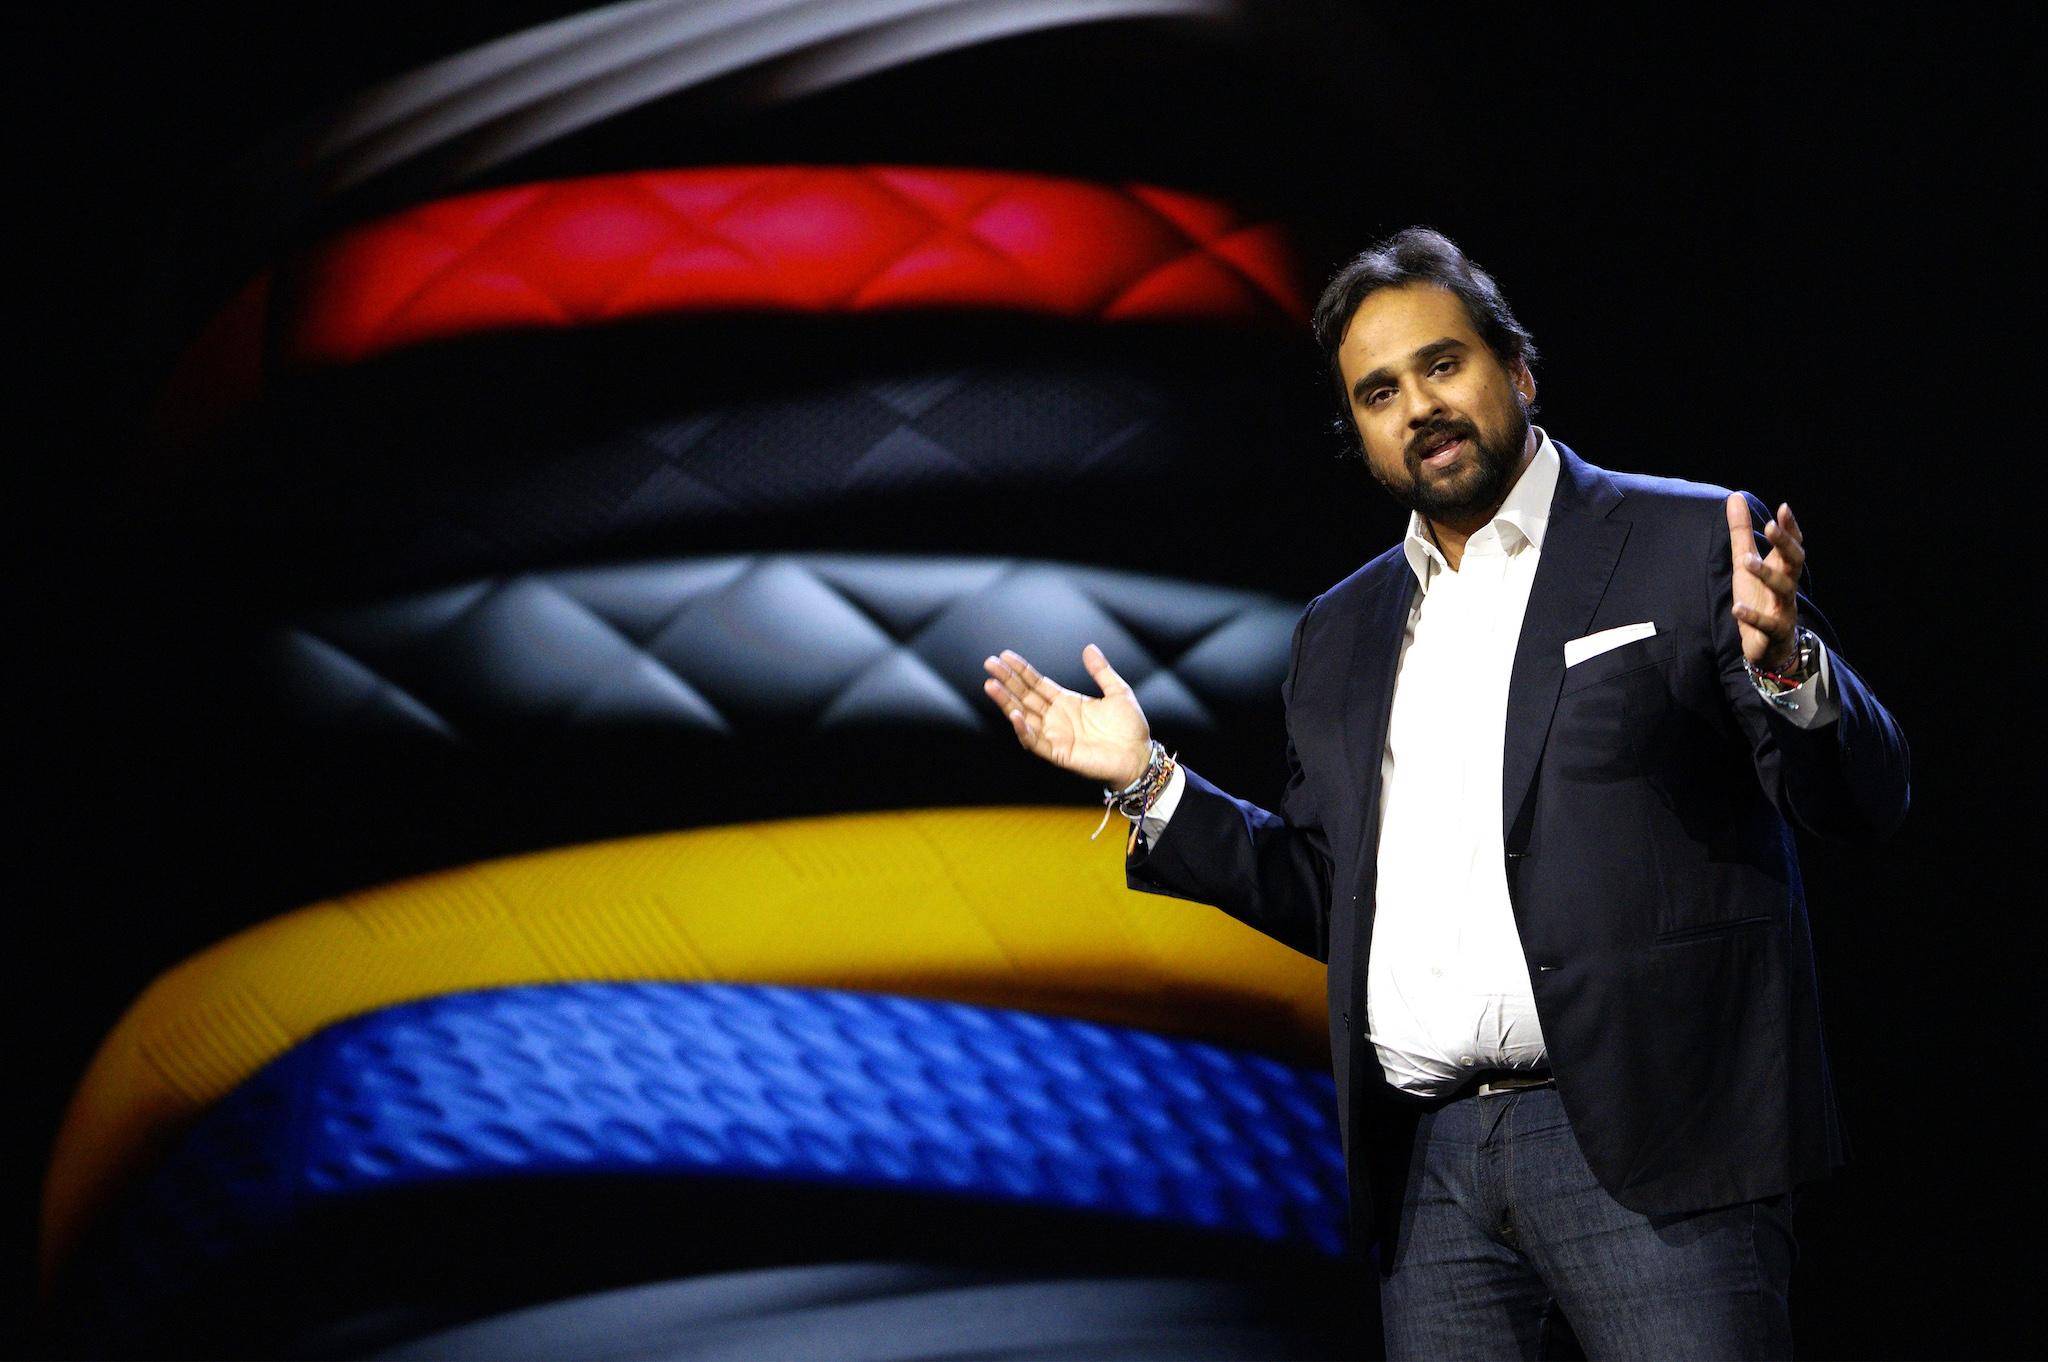 Hosain Rahman, CEO and co-founder of Jawbone, speaks during the Samsung keynote with Jawbone products displayed in the background at the International Consumer Electronics show